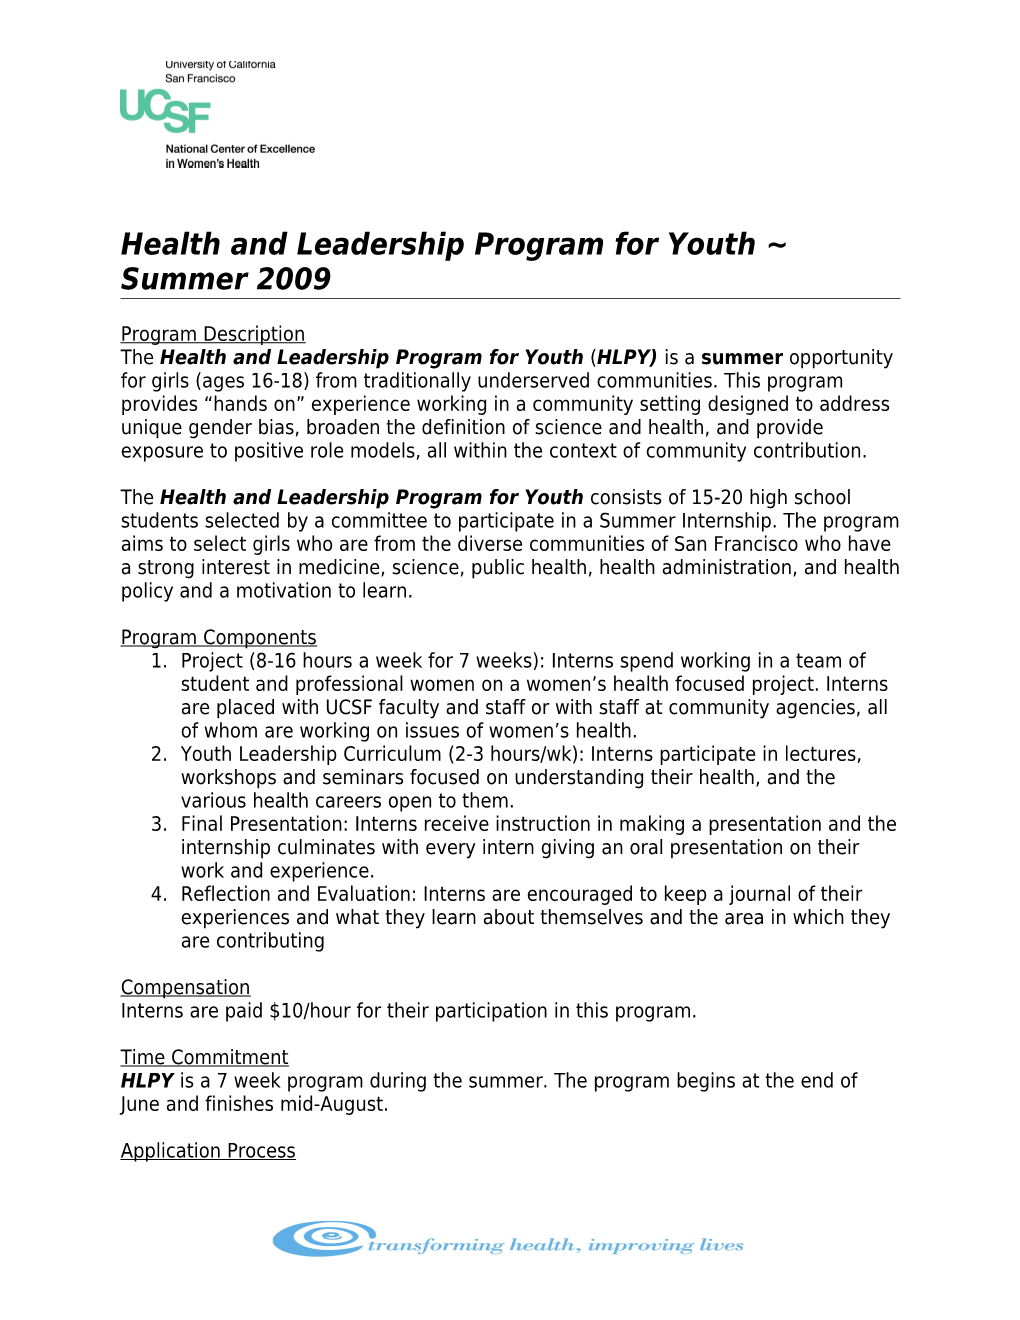 Health and Leadership Program for Youth Summer 2009